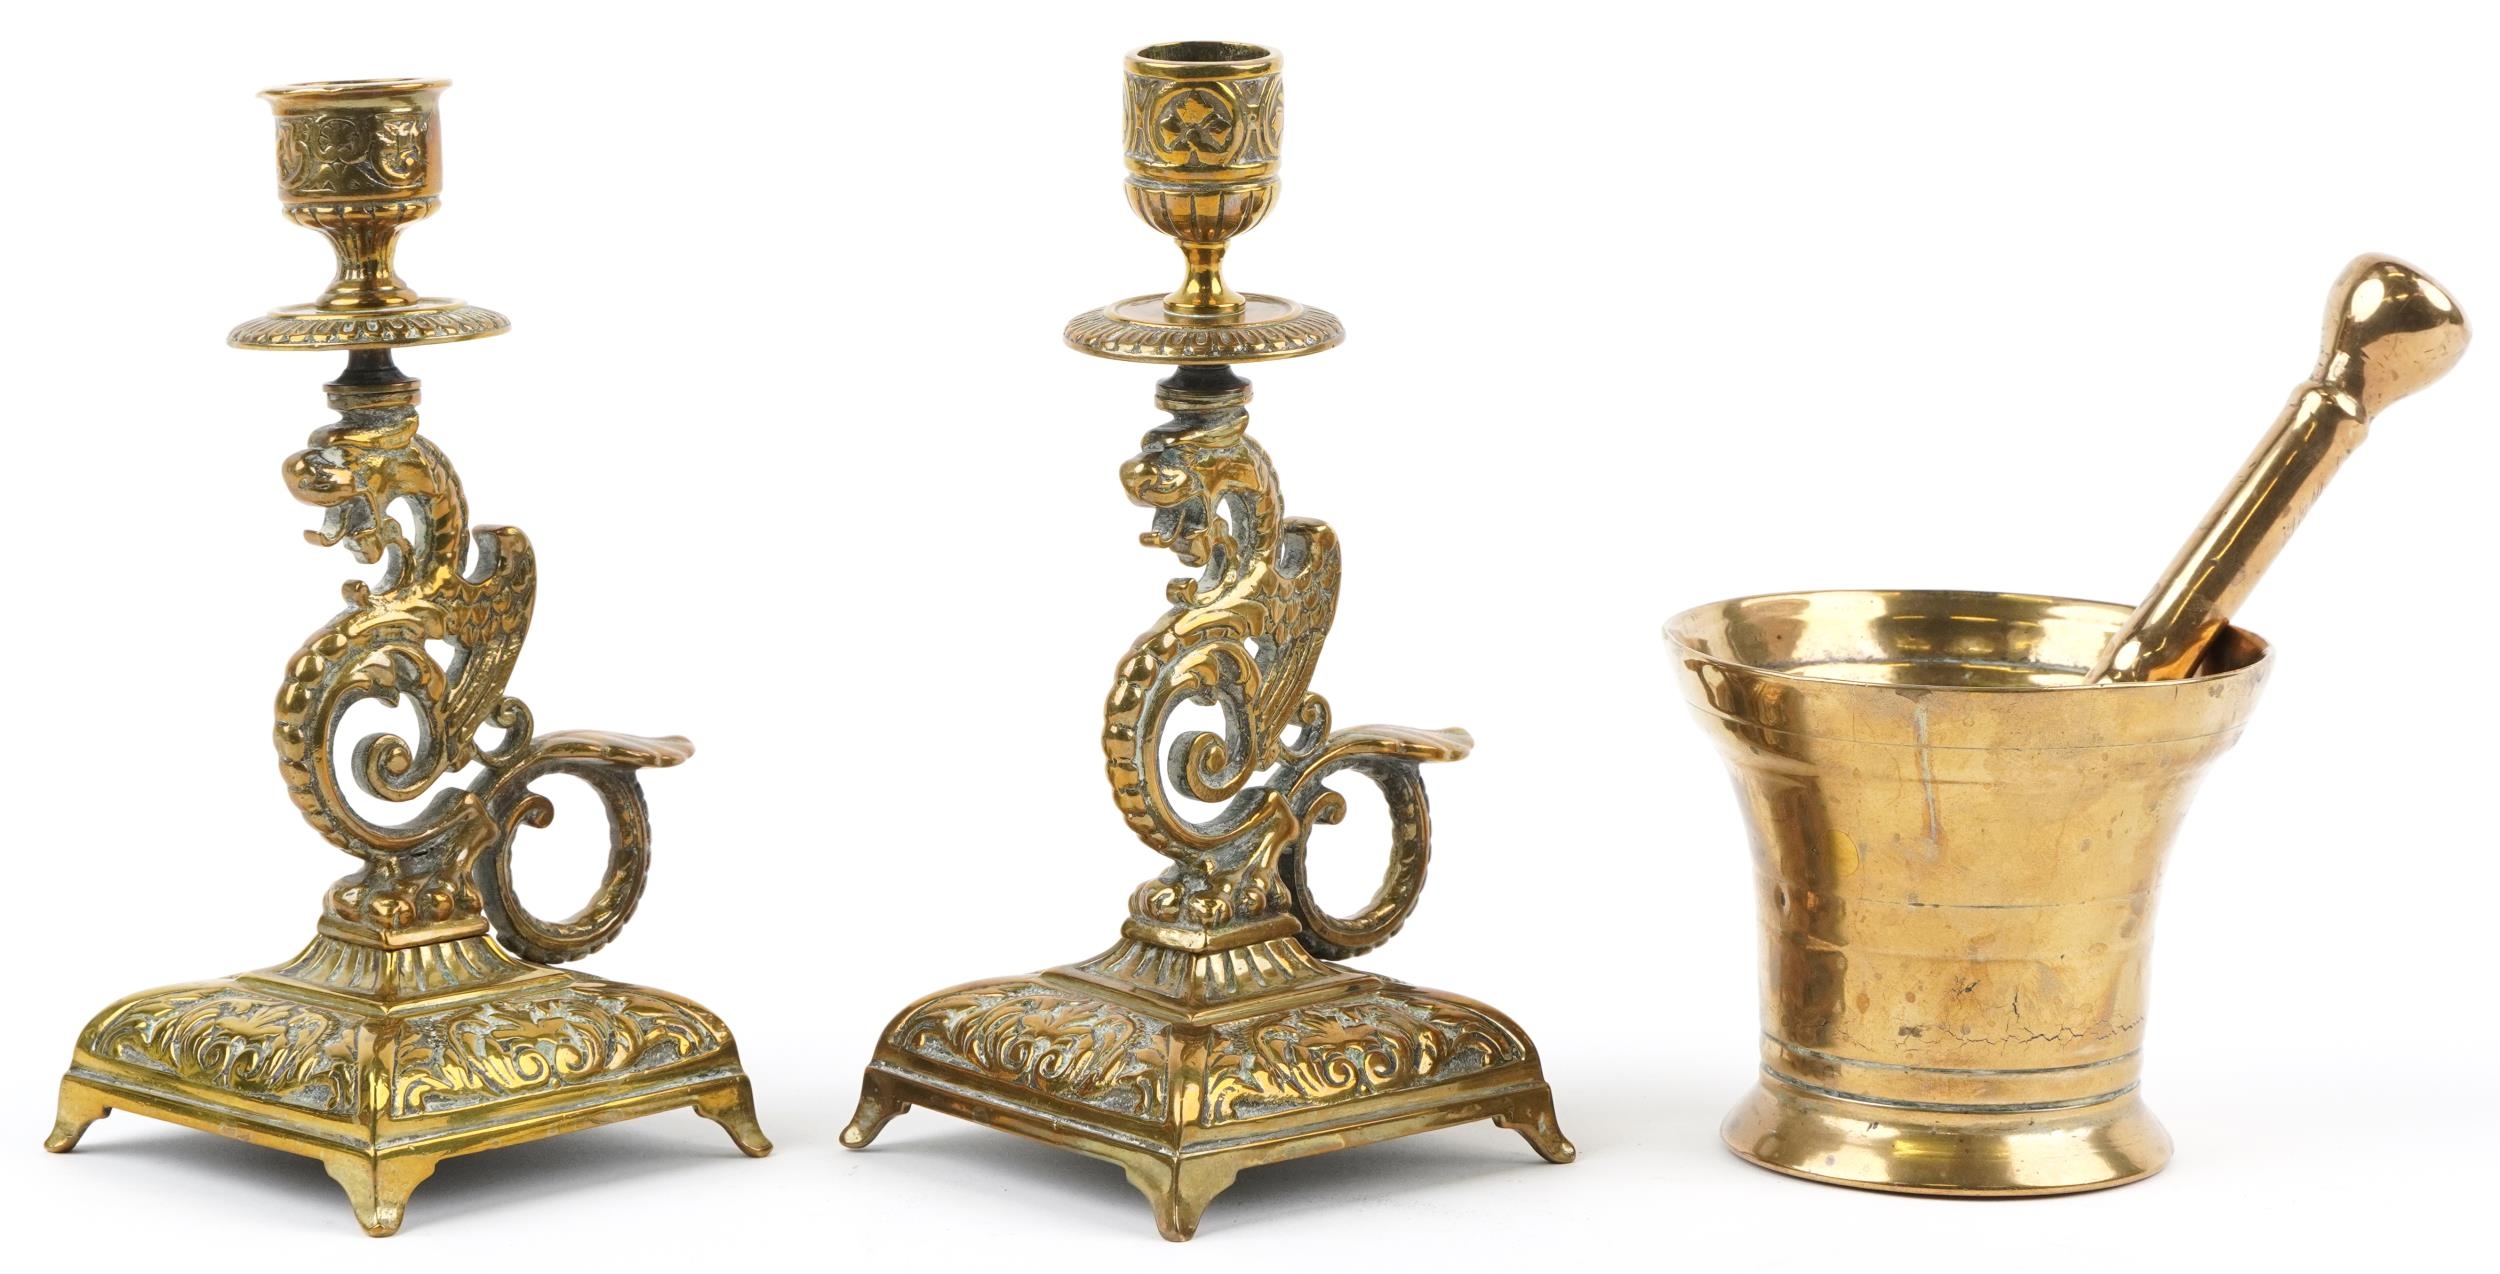 Antique bronze pestle & mortar and pair of dragon design candlesticks, the largest 19,5cm high